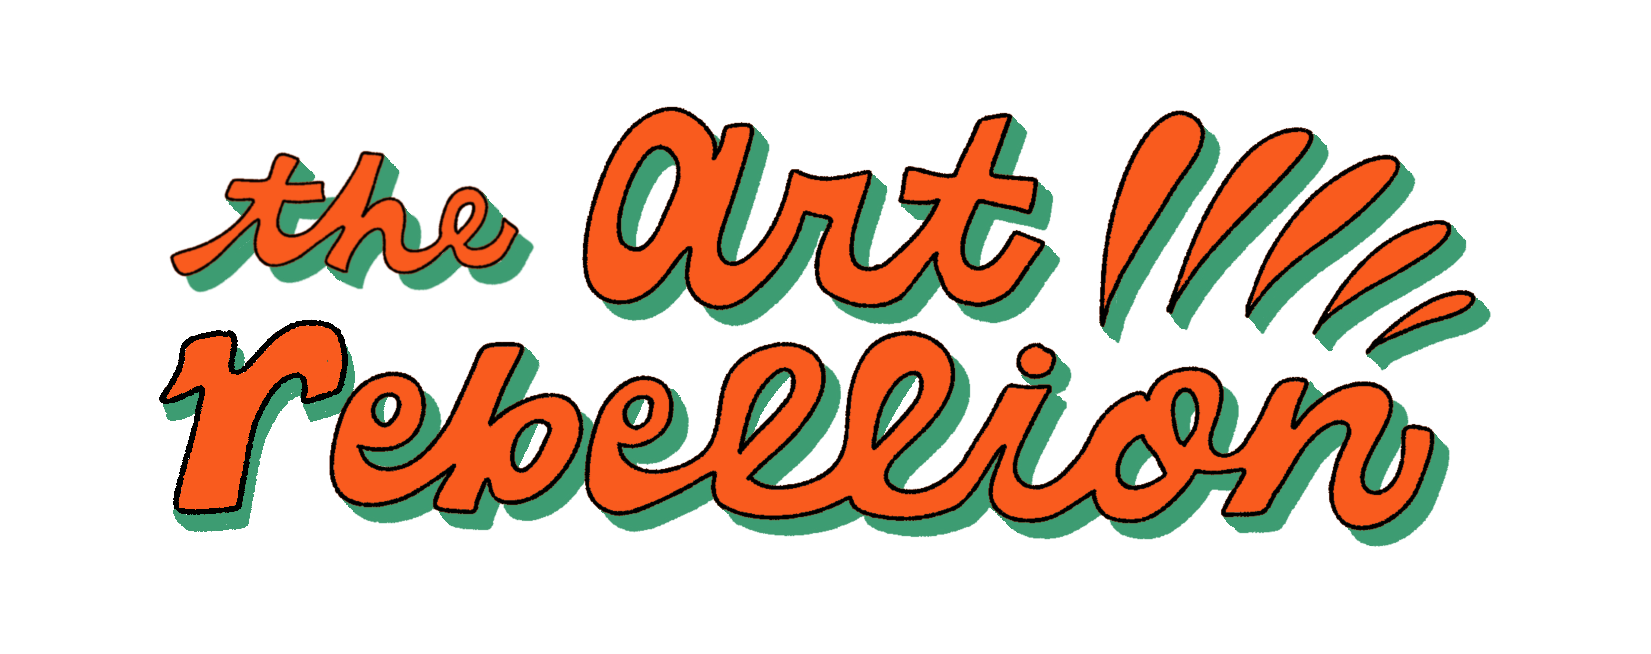 the-art-rebellion-written-in-cursive-font-in-red-with-a-green-shadow